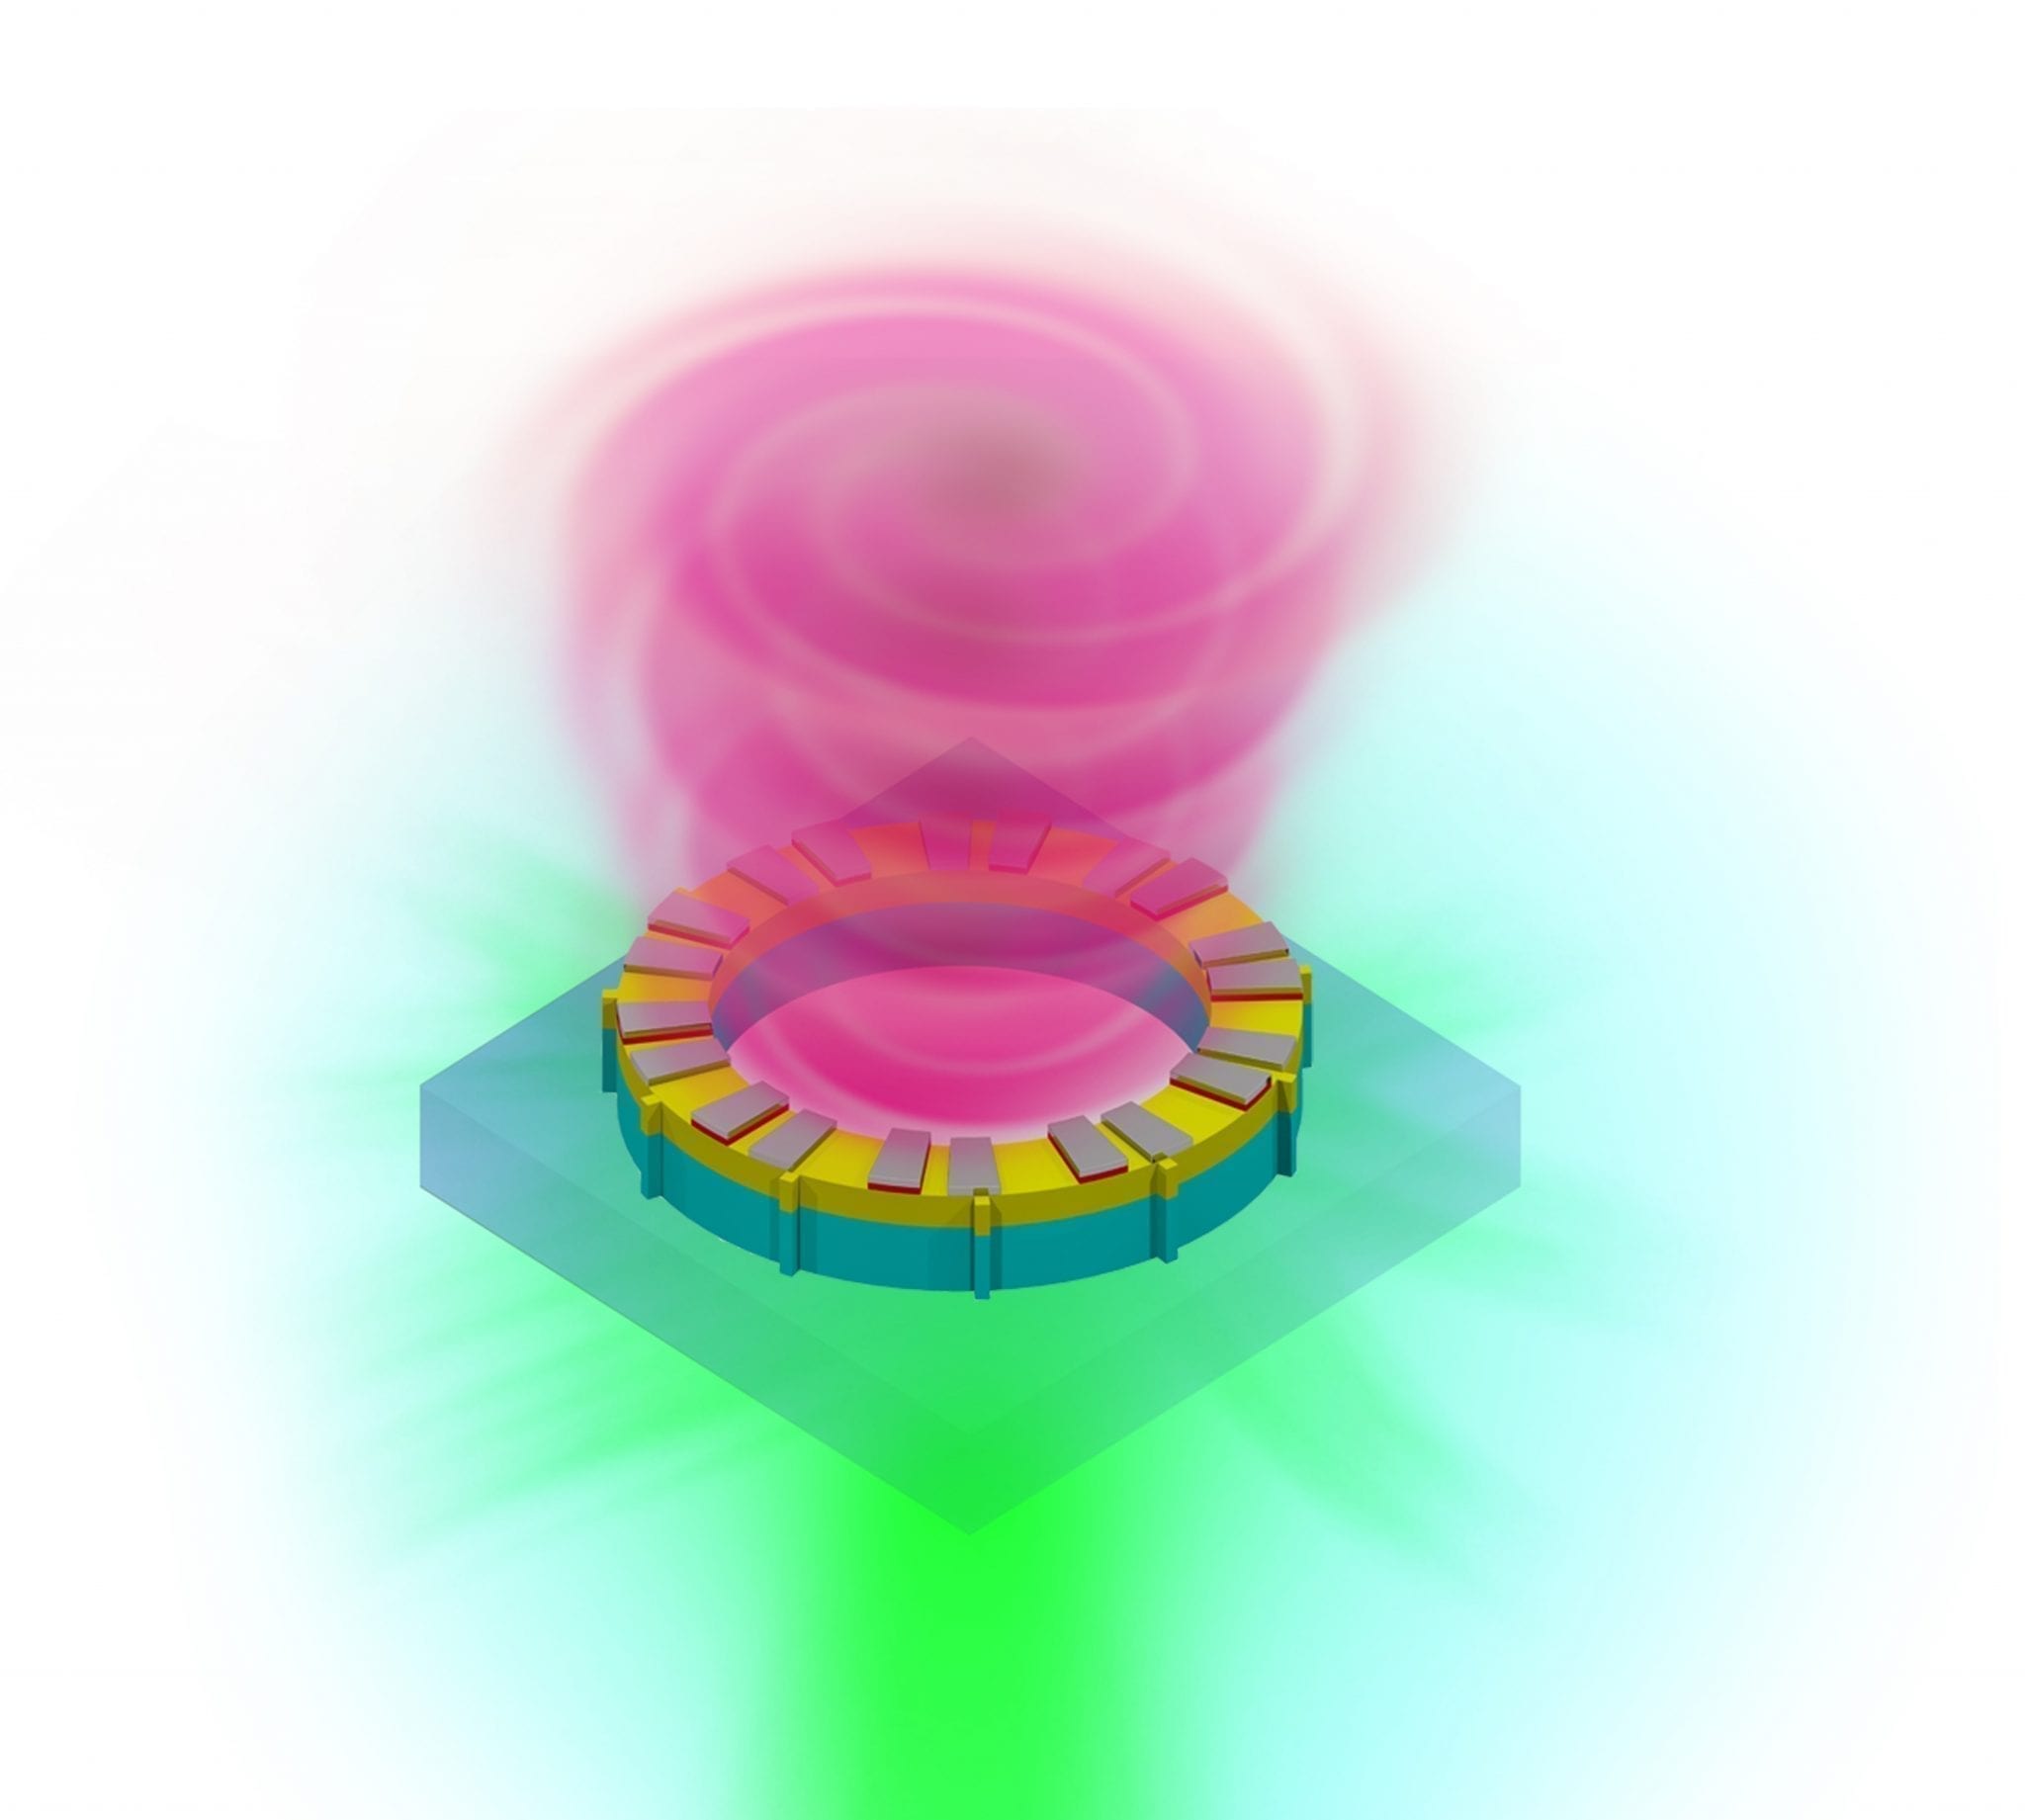 Vortex laser could boost computing power and information transfer rates tenfold